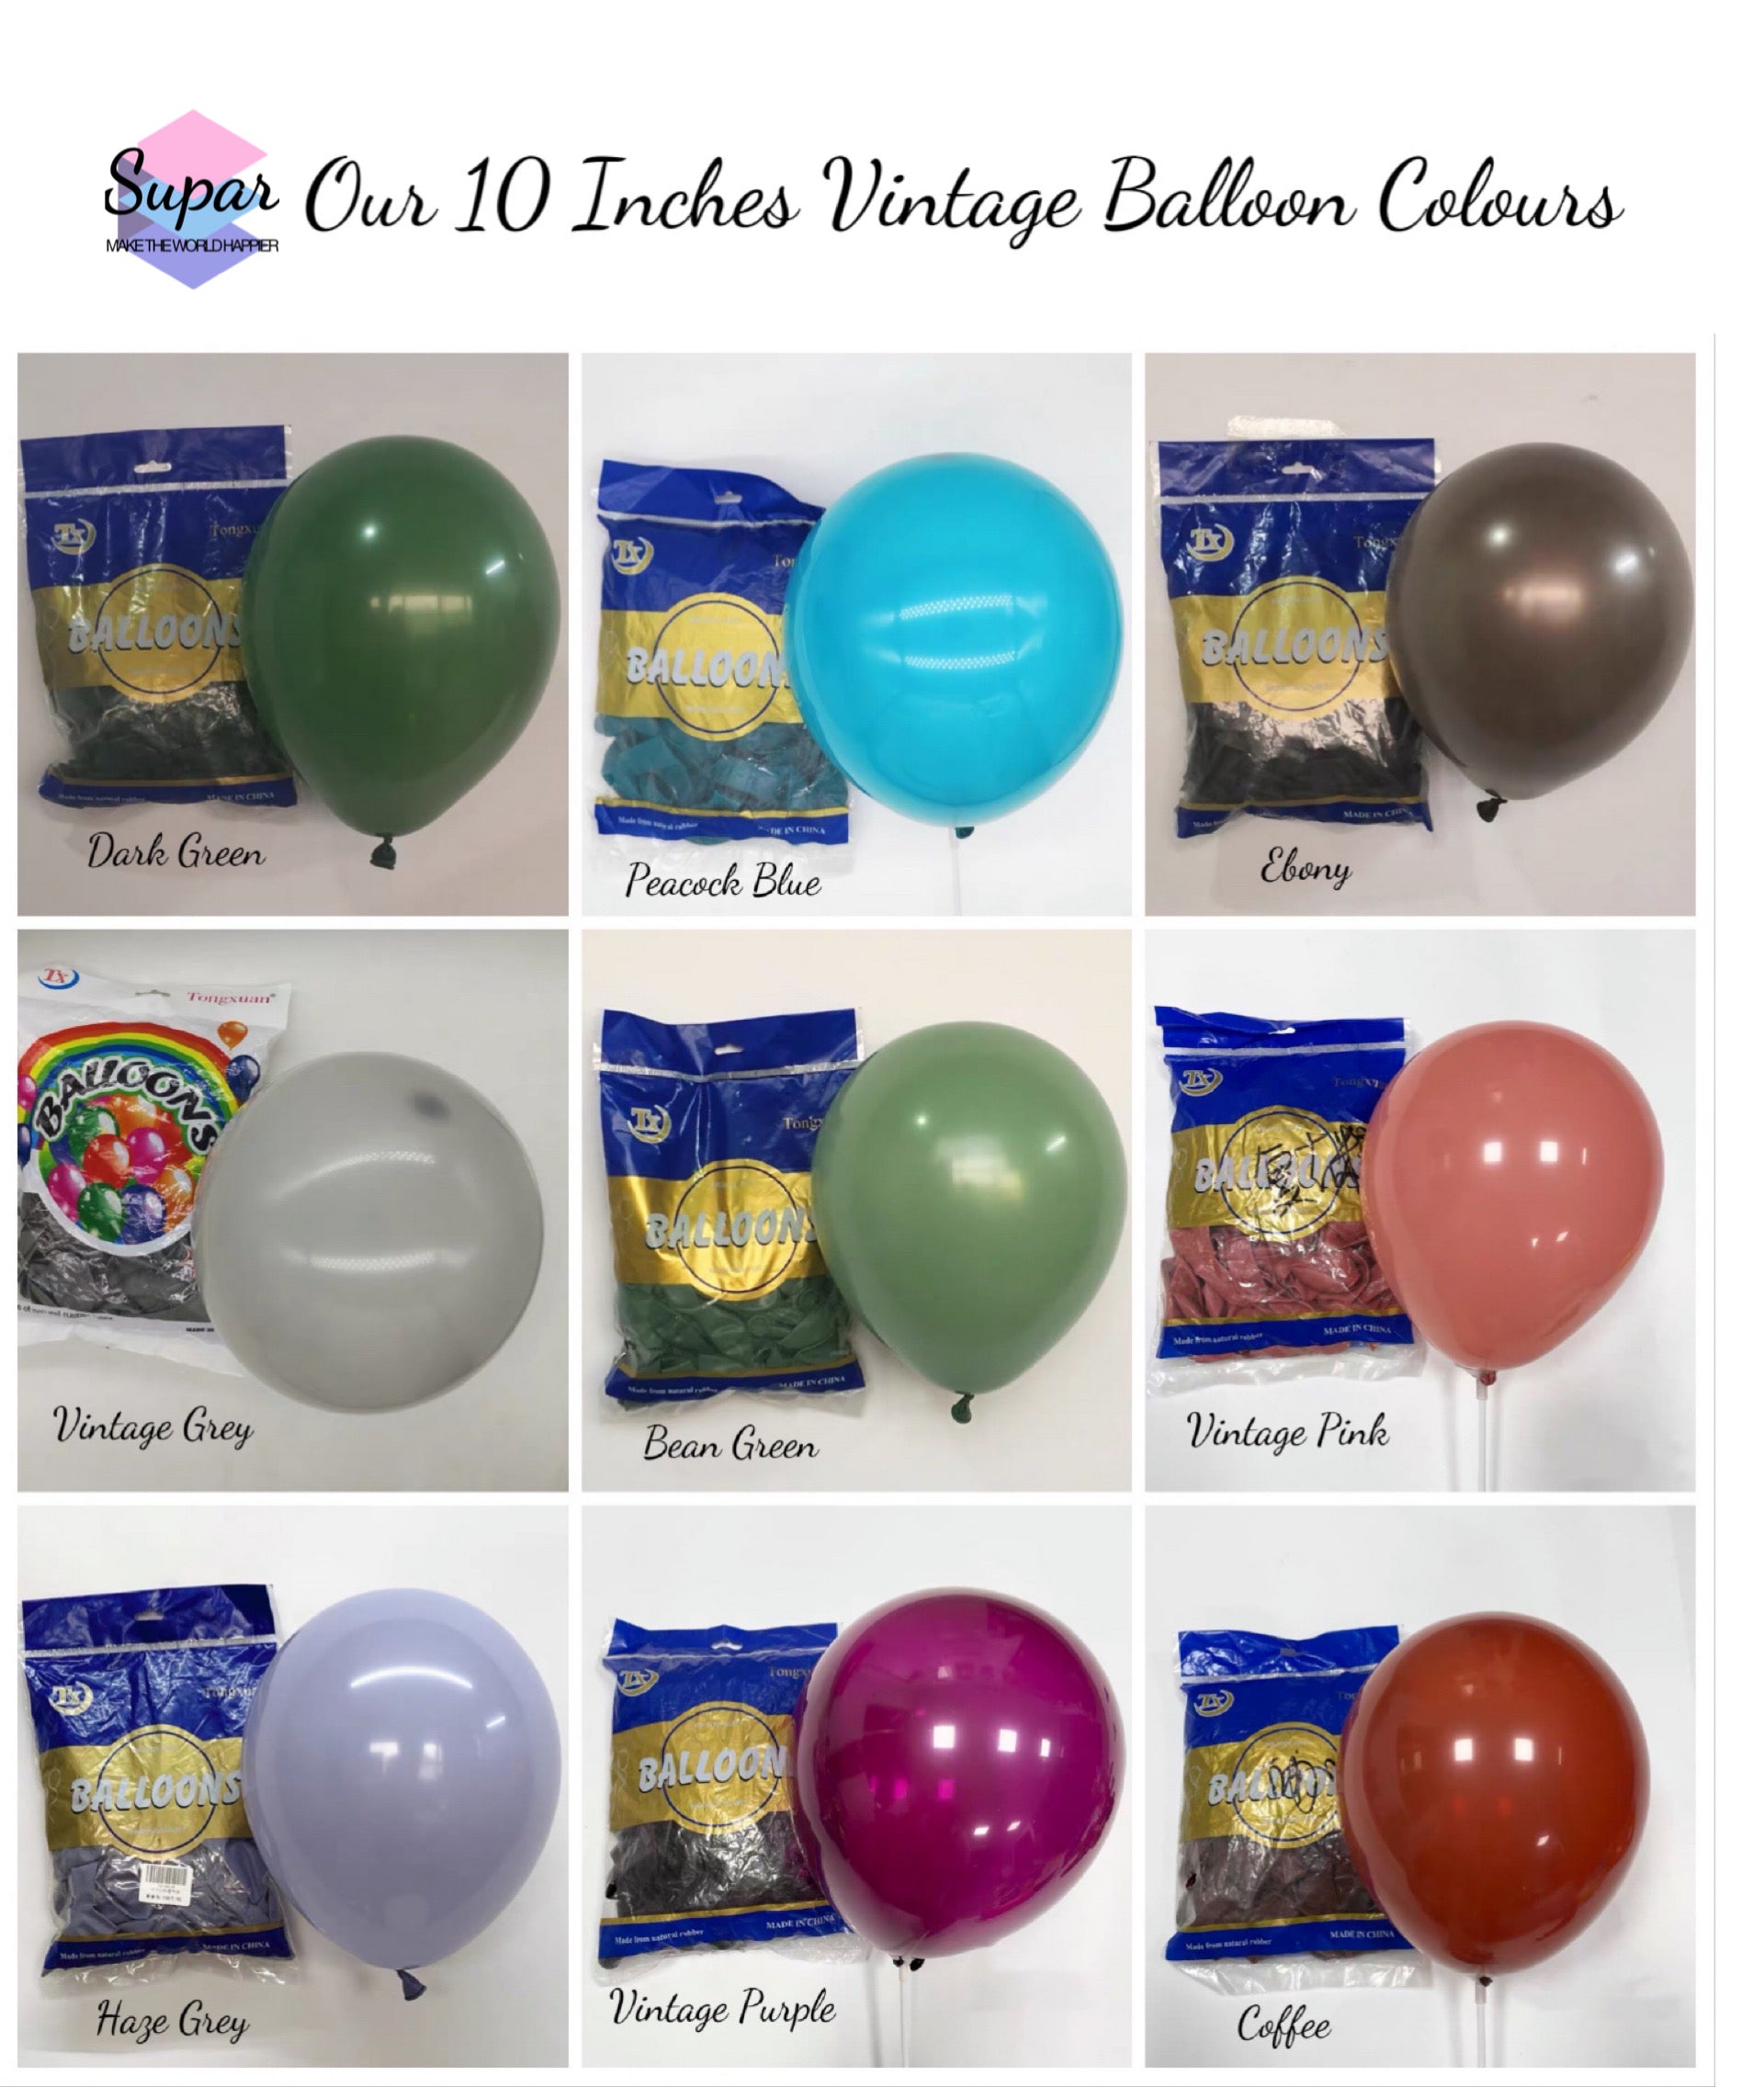 Classic Balloon Decor For Every Event